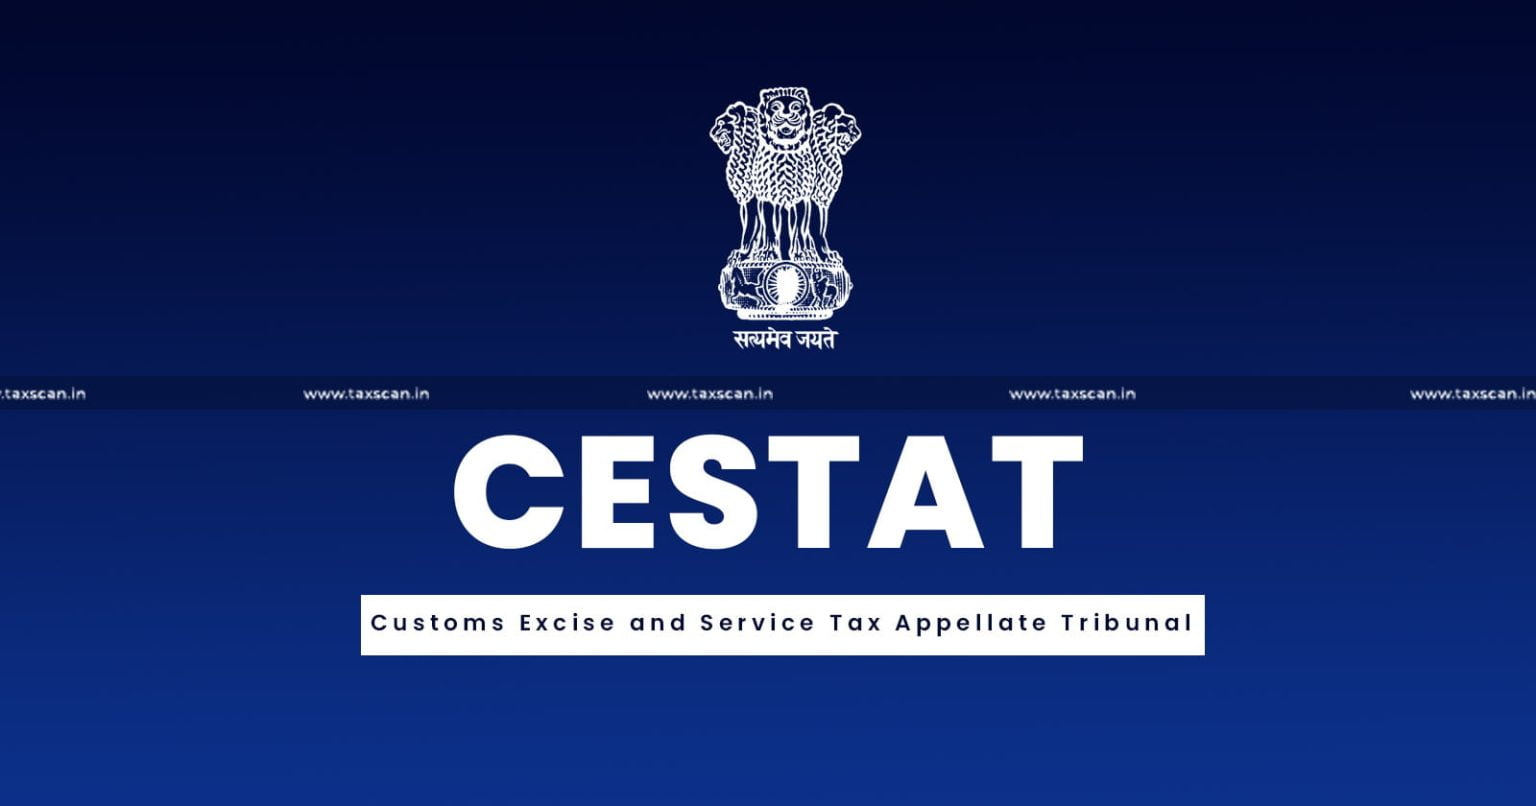 No Testimony of Witness - Relevant Evidence - Central Excise Act - CESTAT - taxscan